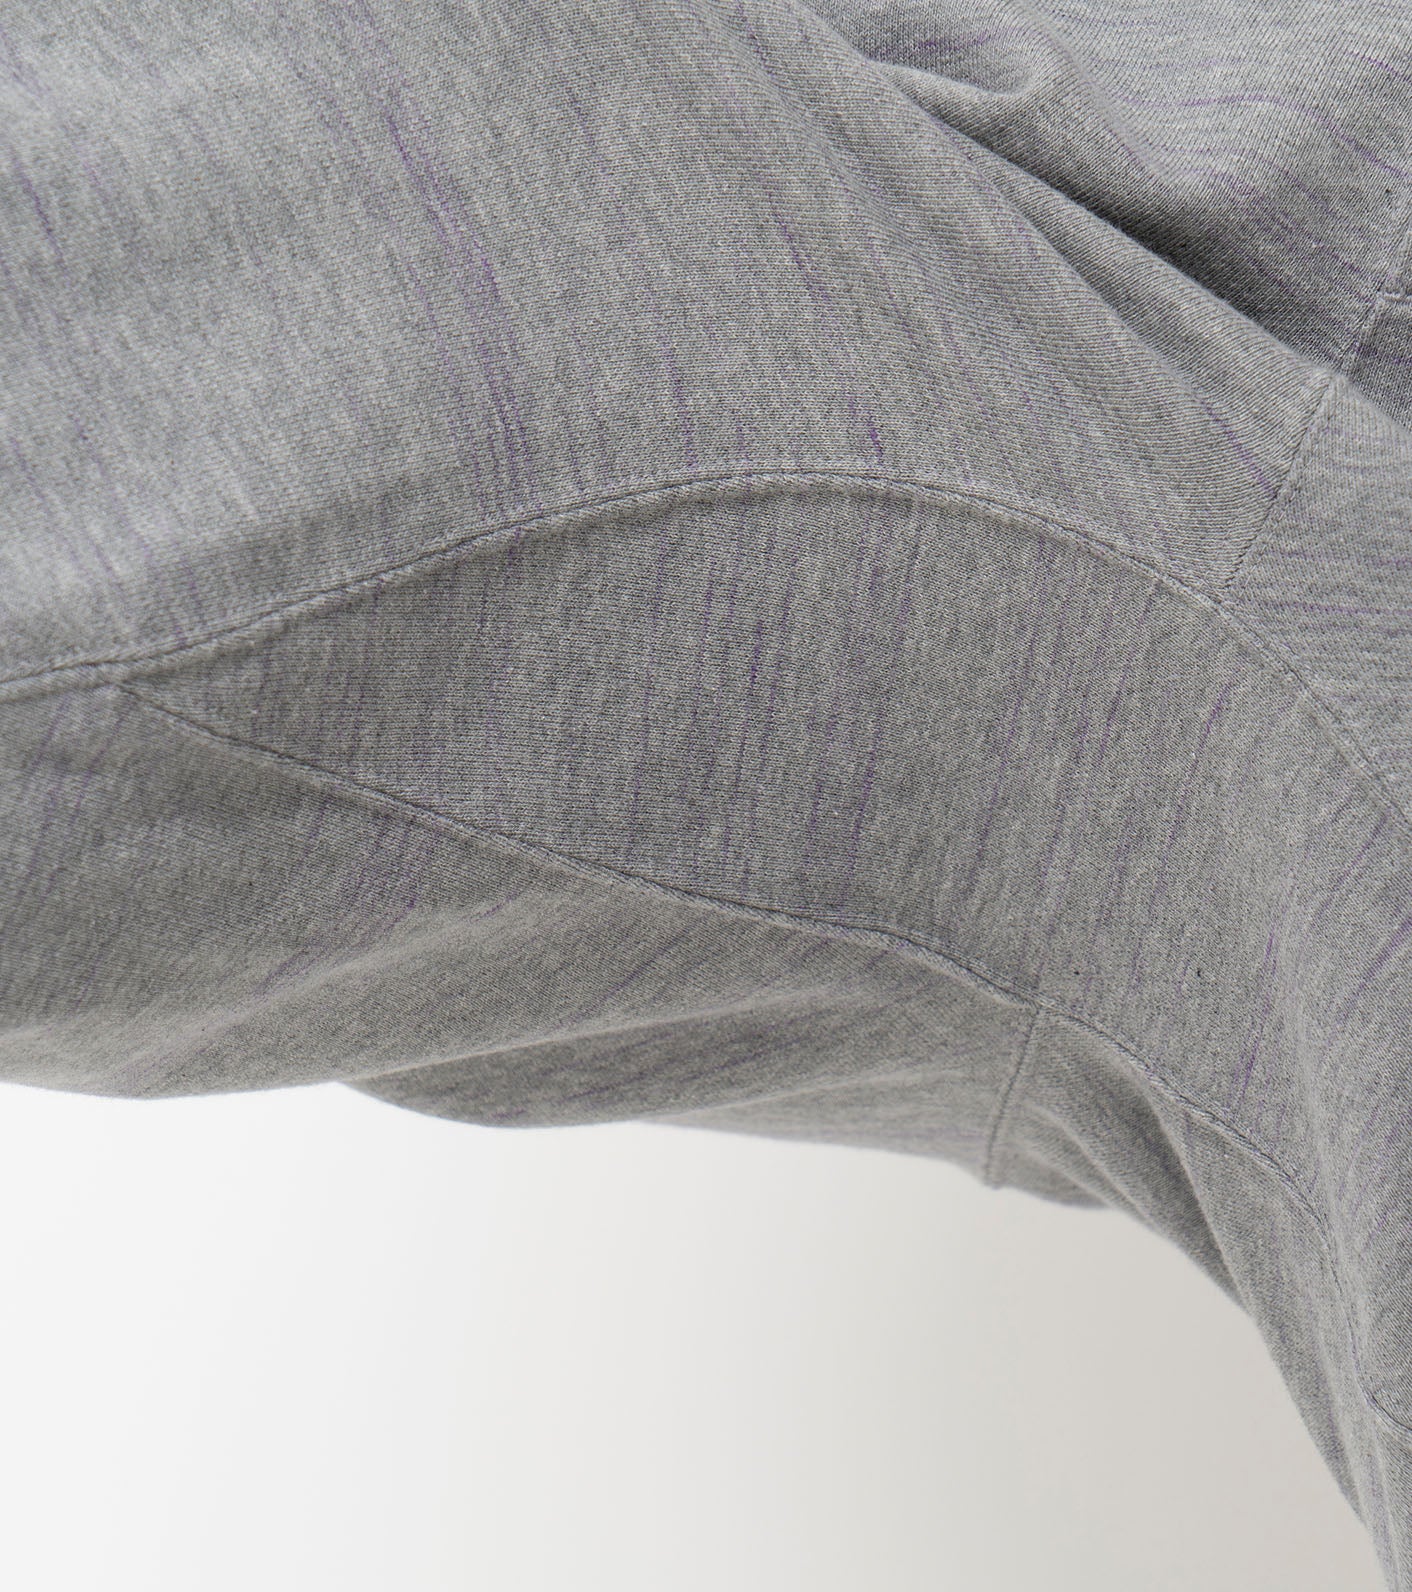 THE NORTH FACE PURPLE LABEL Field Sweat Pants